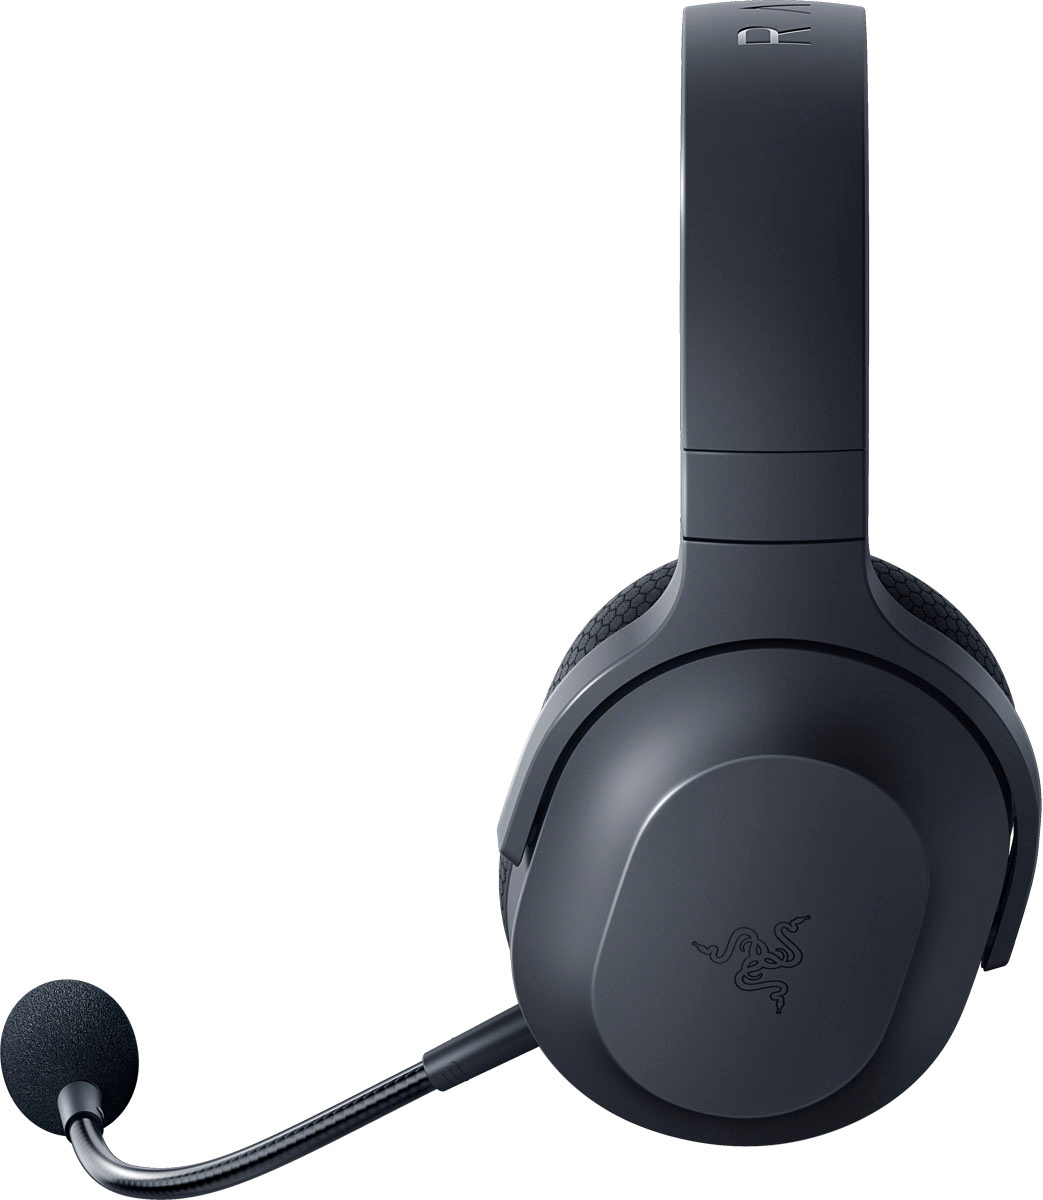 Free Gift] Razer Barracuda X Wireless Multi-platform Gaming and Mobile  Headset 2022 Edition – Available in 3 Colors – GamePro Shop